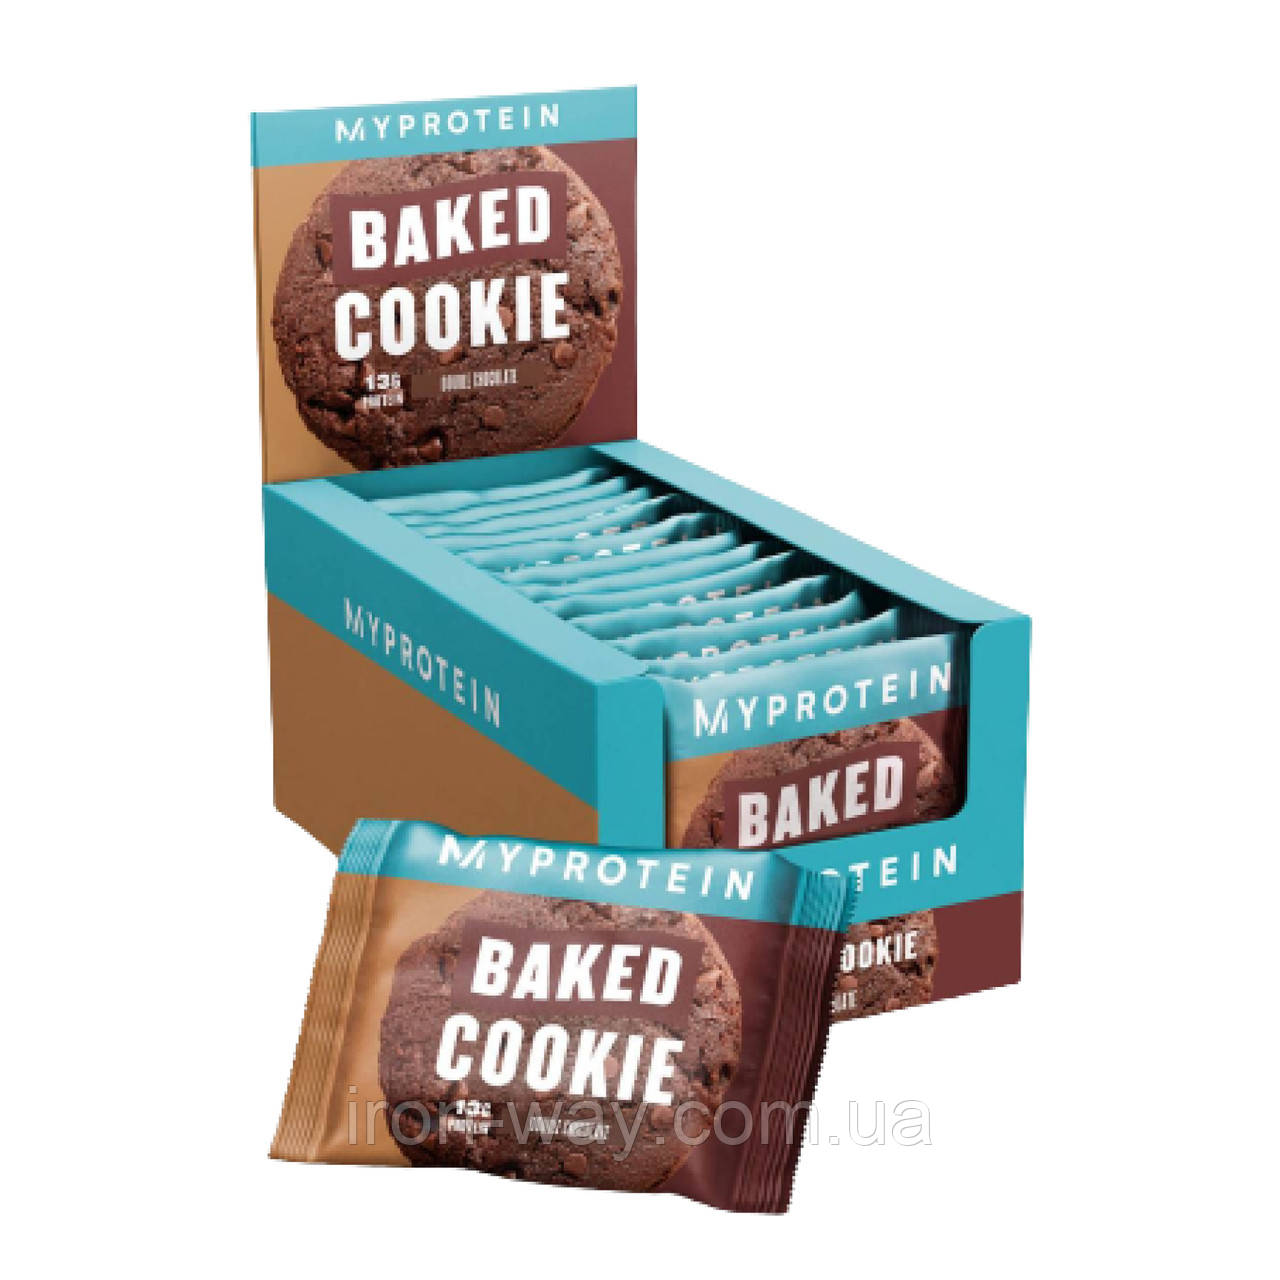 Baked Cookie - 12x75g Chocolate